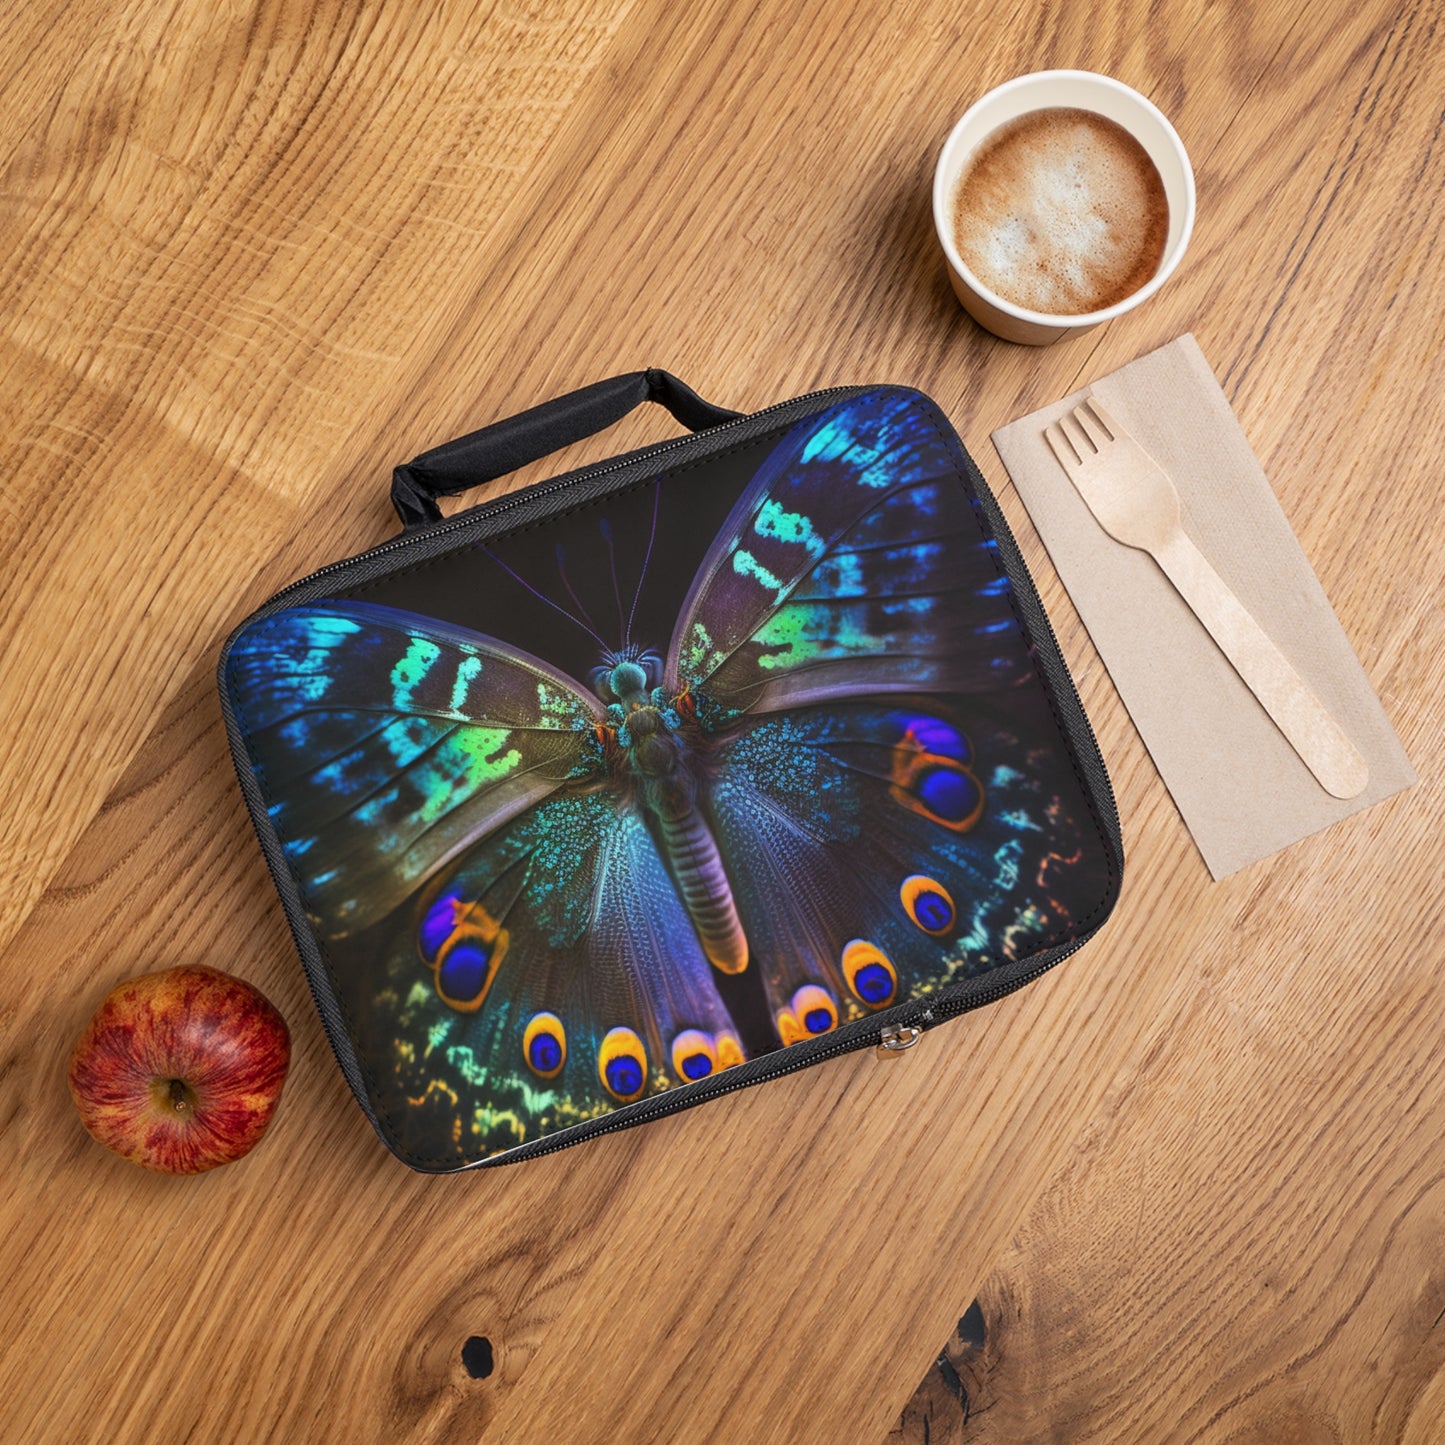 Lunch Bag Neon Hue Butterfly 3